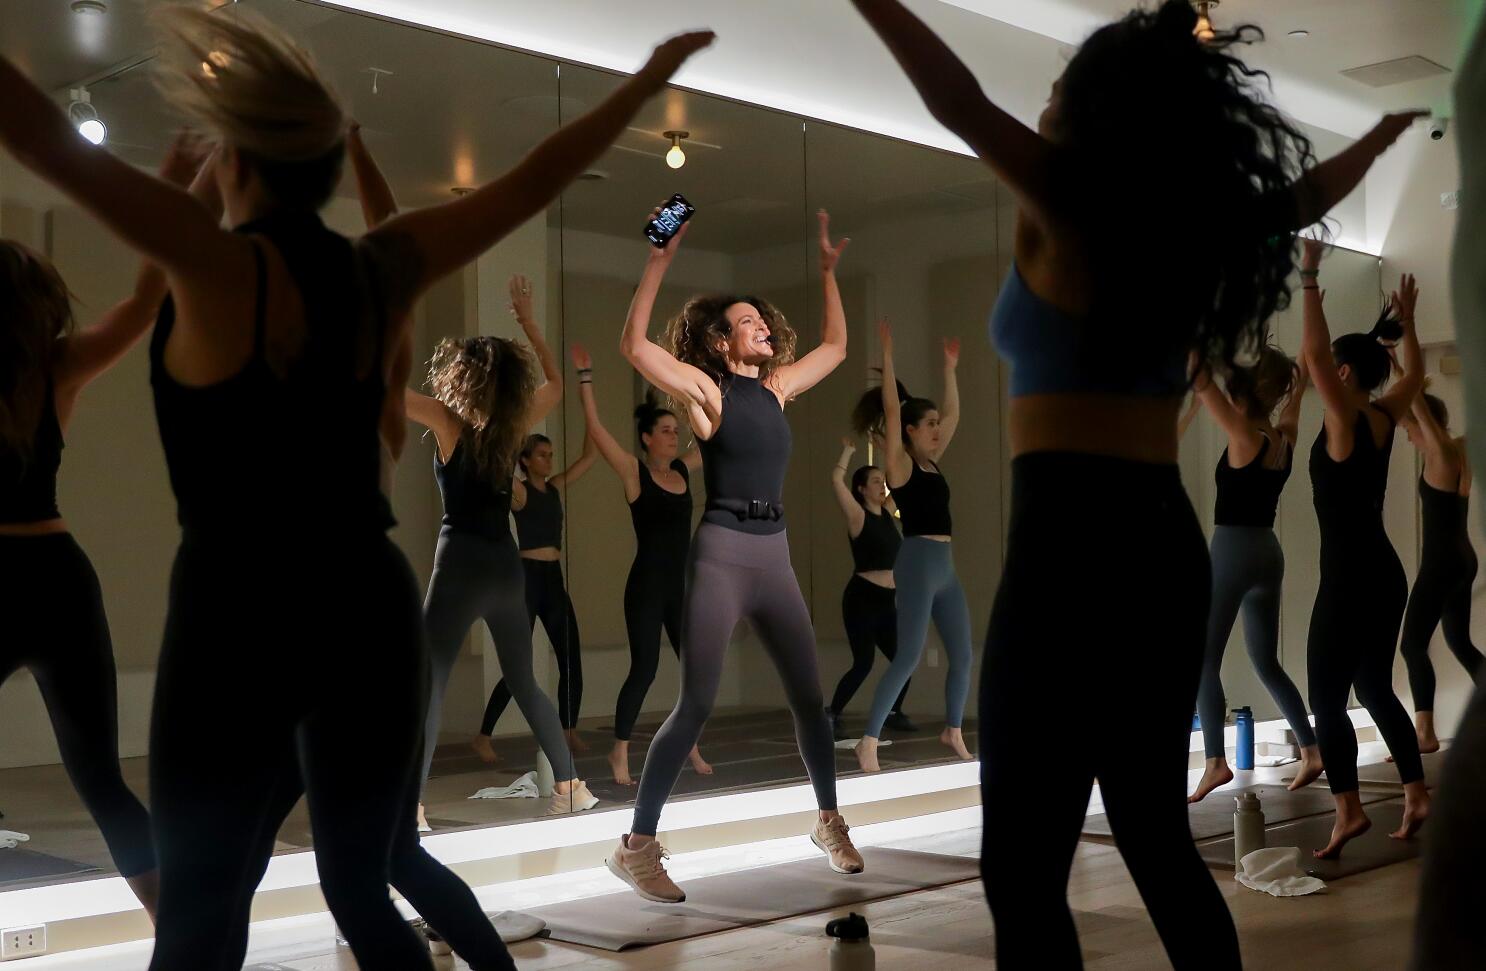 Heart of Jazzercise still beats by shaking up the routine